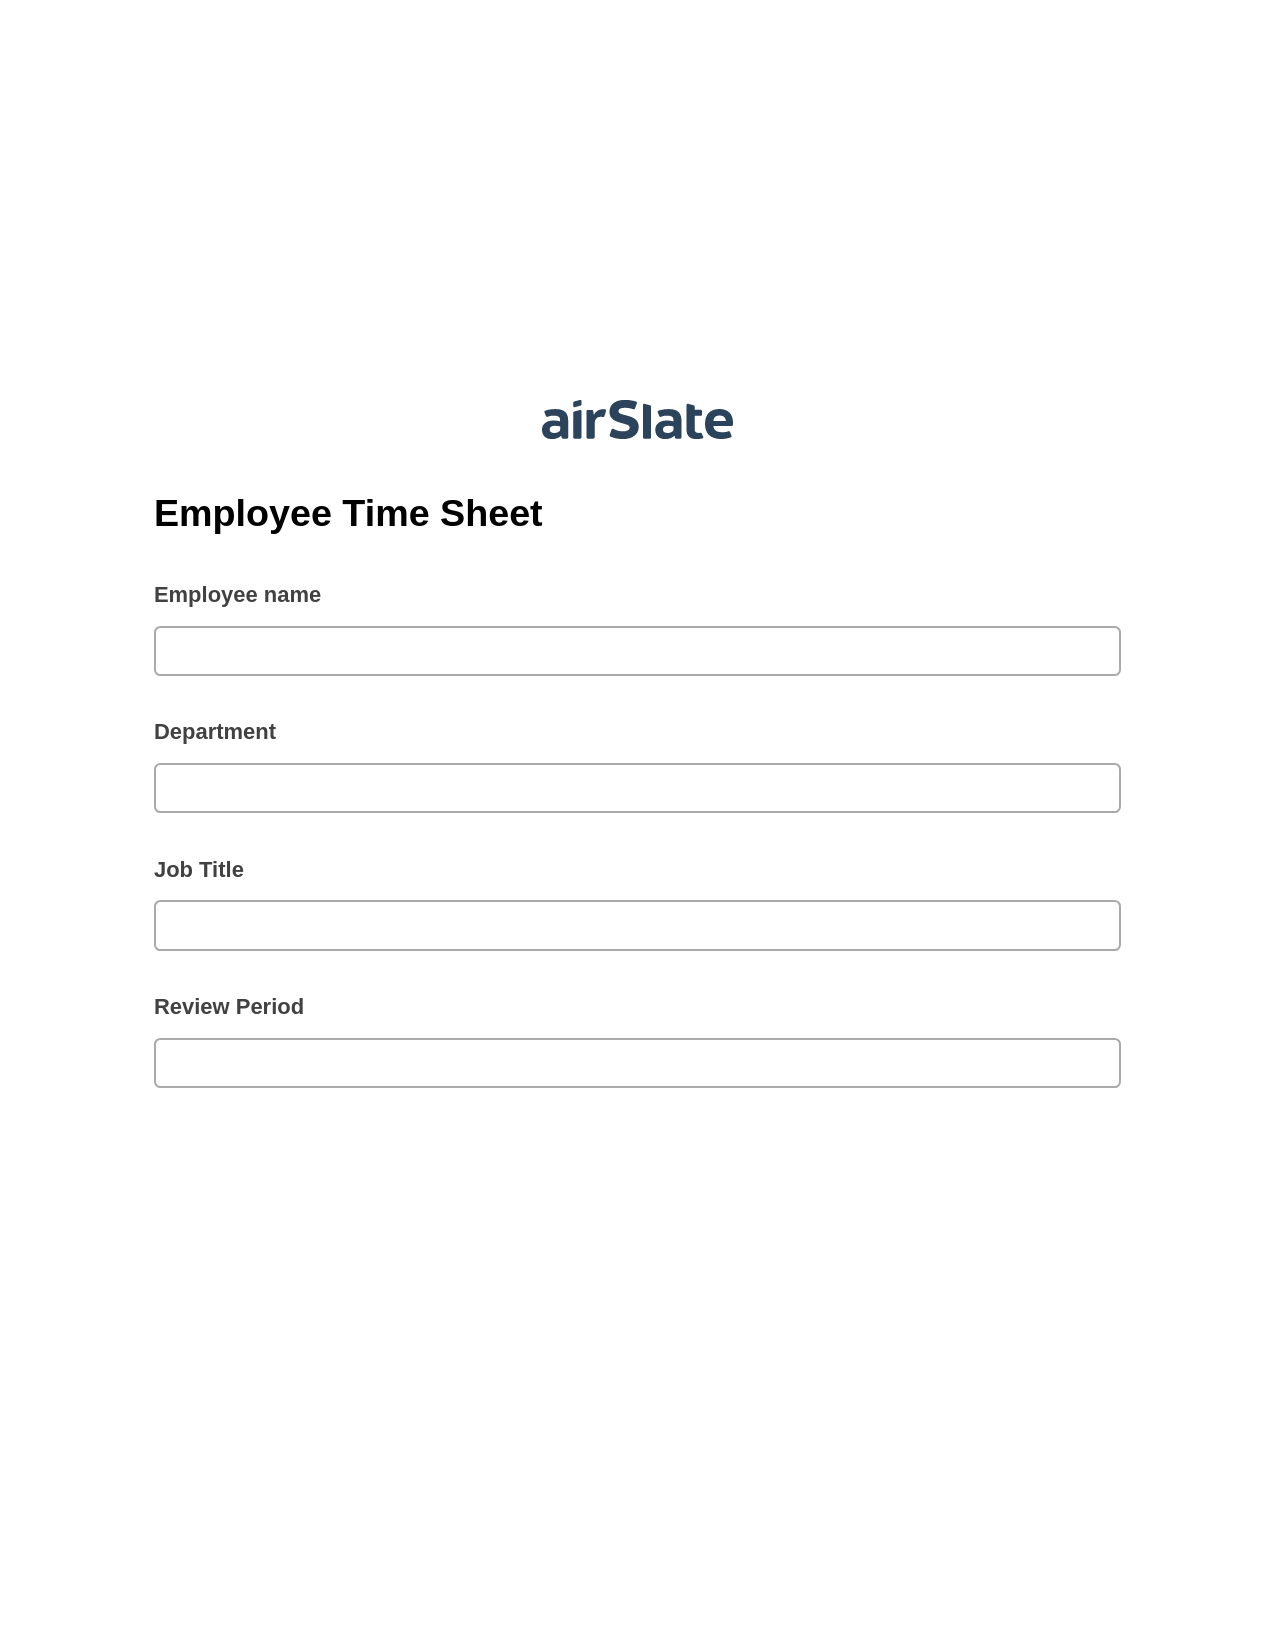 Multirole Employee Time Sheet Pre-fill from CSV File Bot, Create slate bot, Export to Salesforce Record Bot